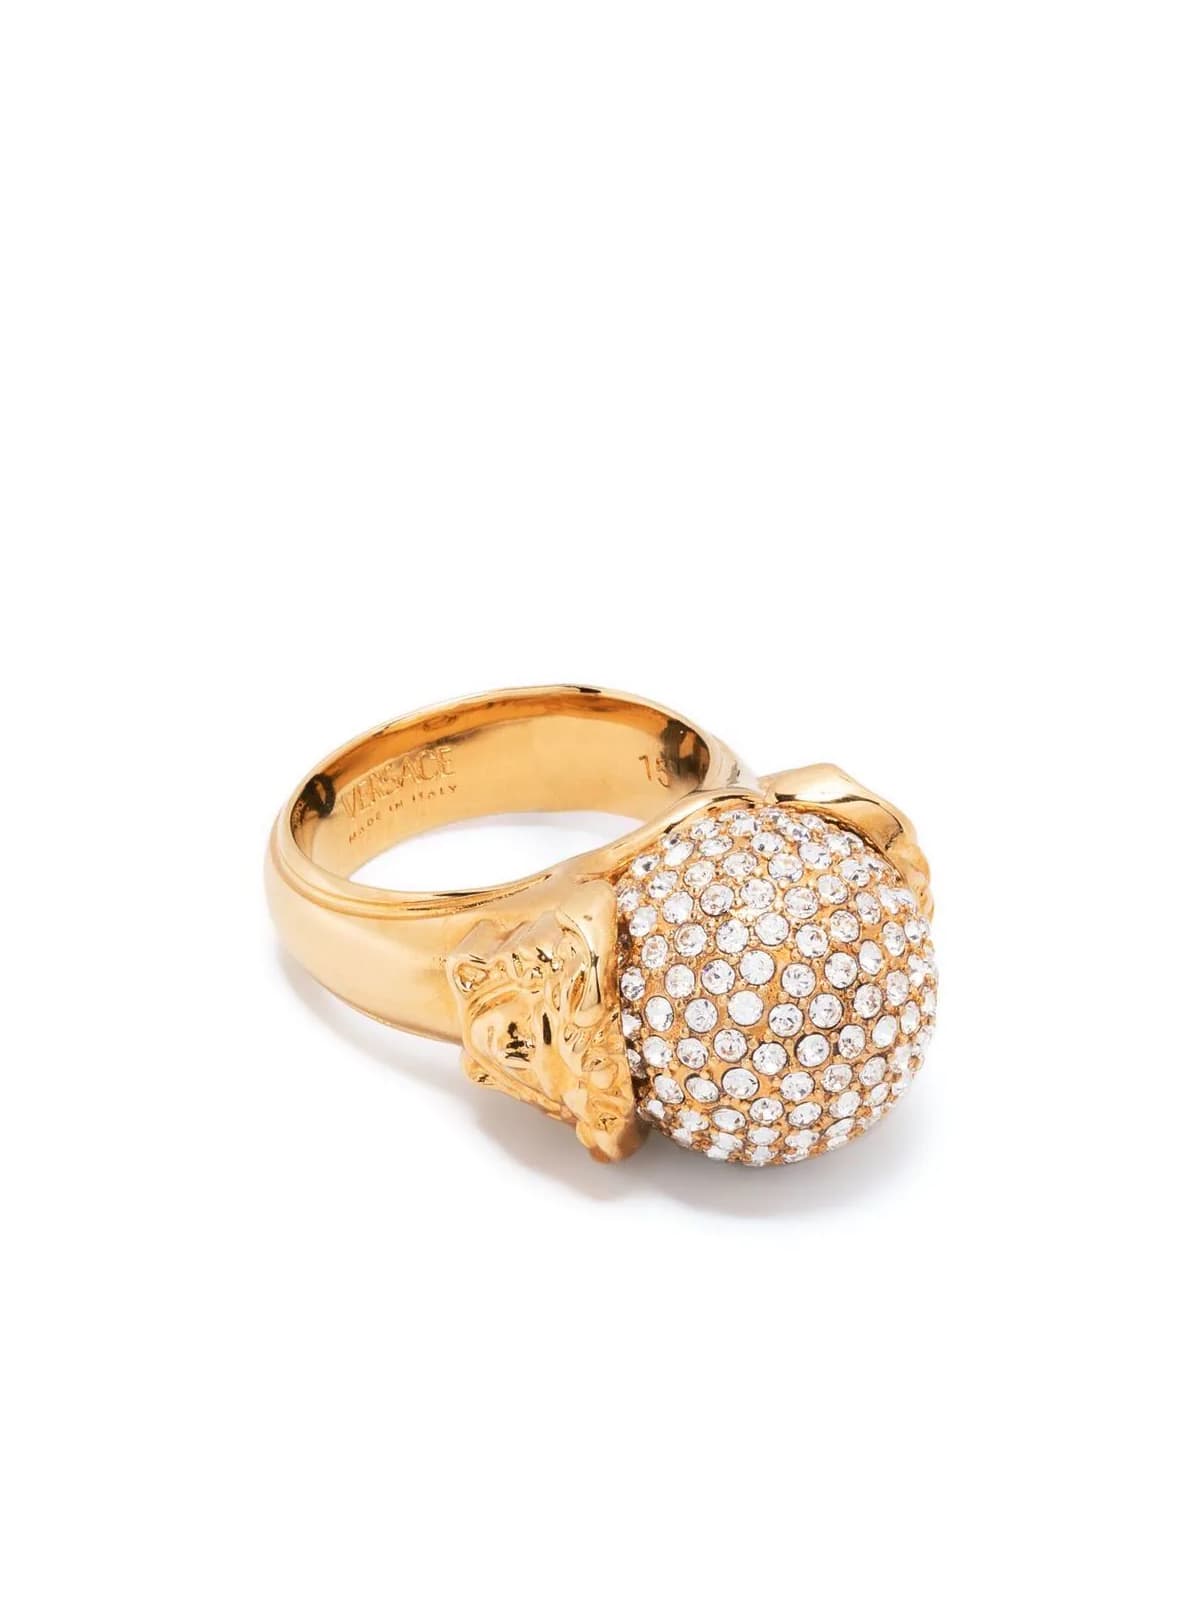 Fashion Metal Ring With Strass